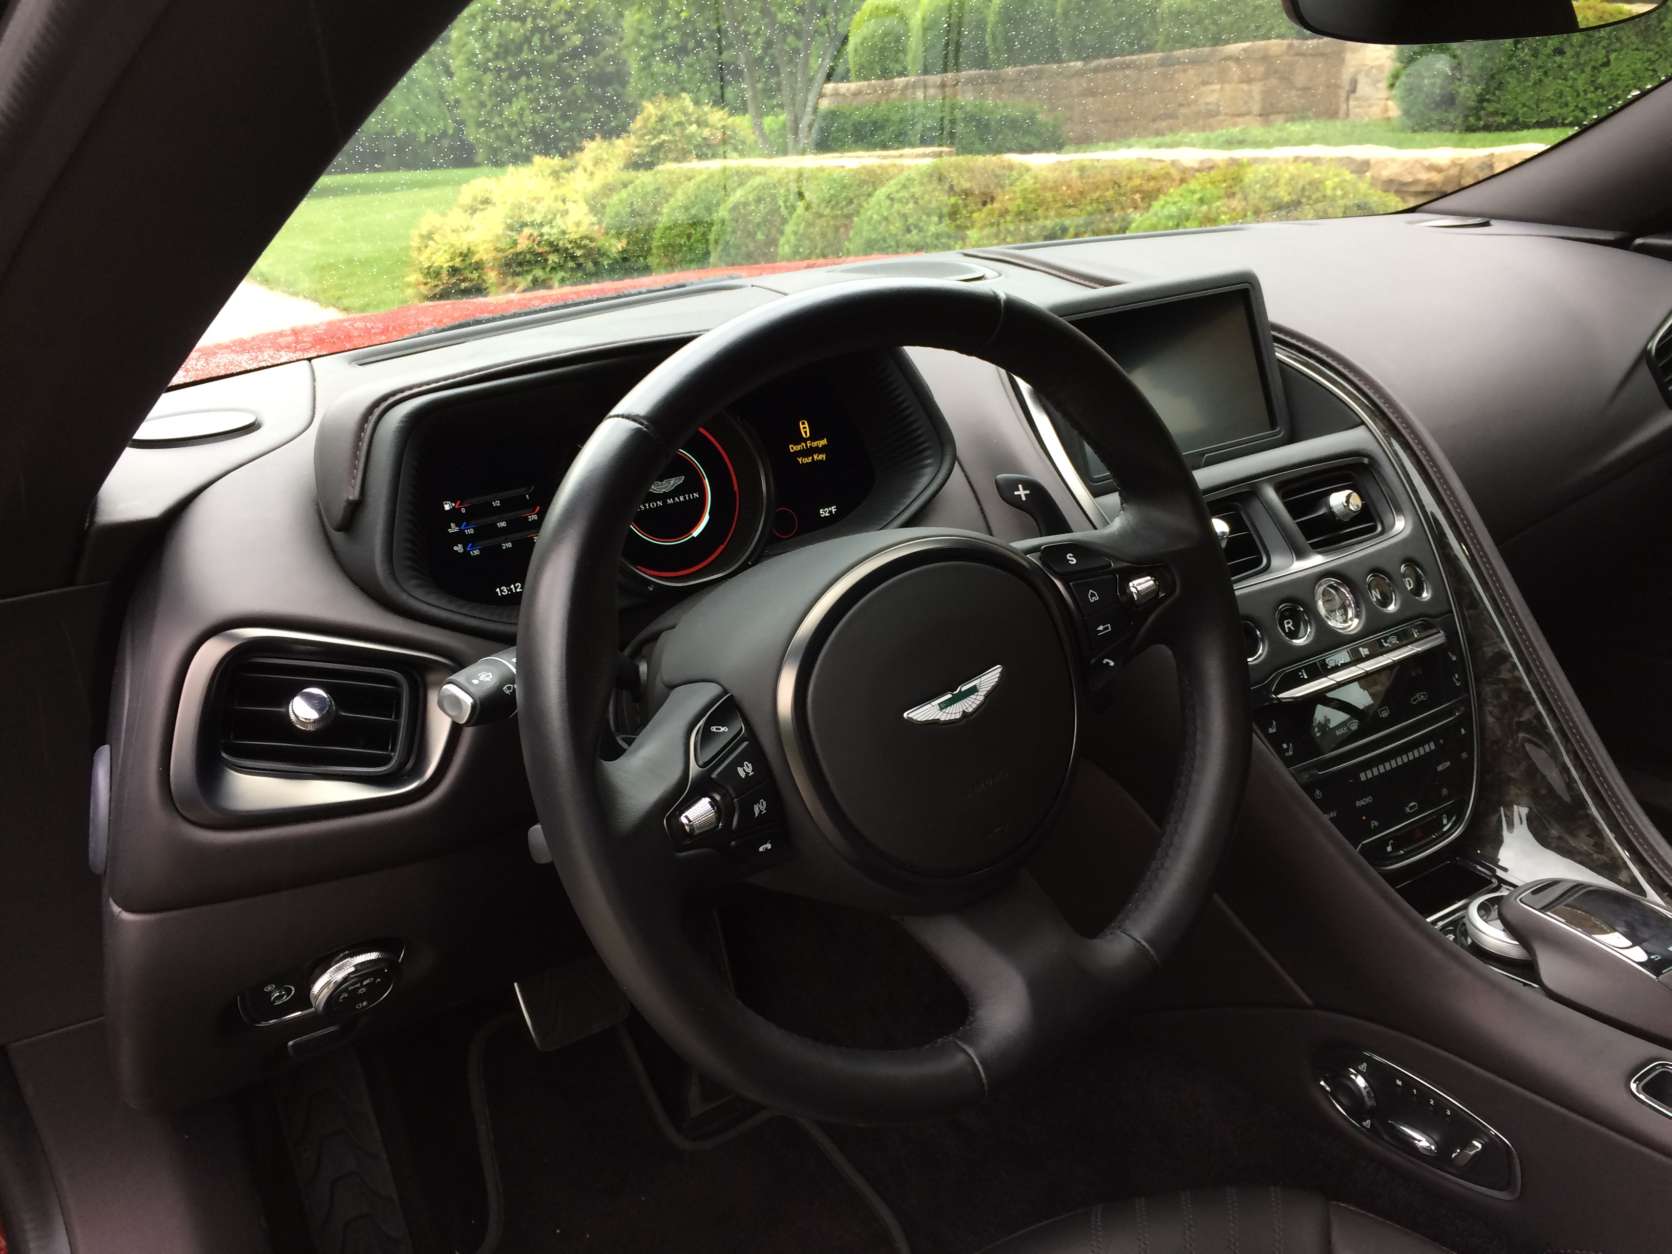 The inside of the Aston Martin DB11 impresses with that British style and flair. (WTOP/Mike Parris)